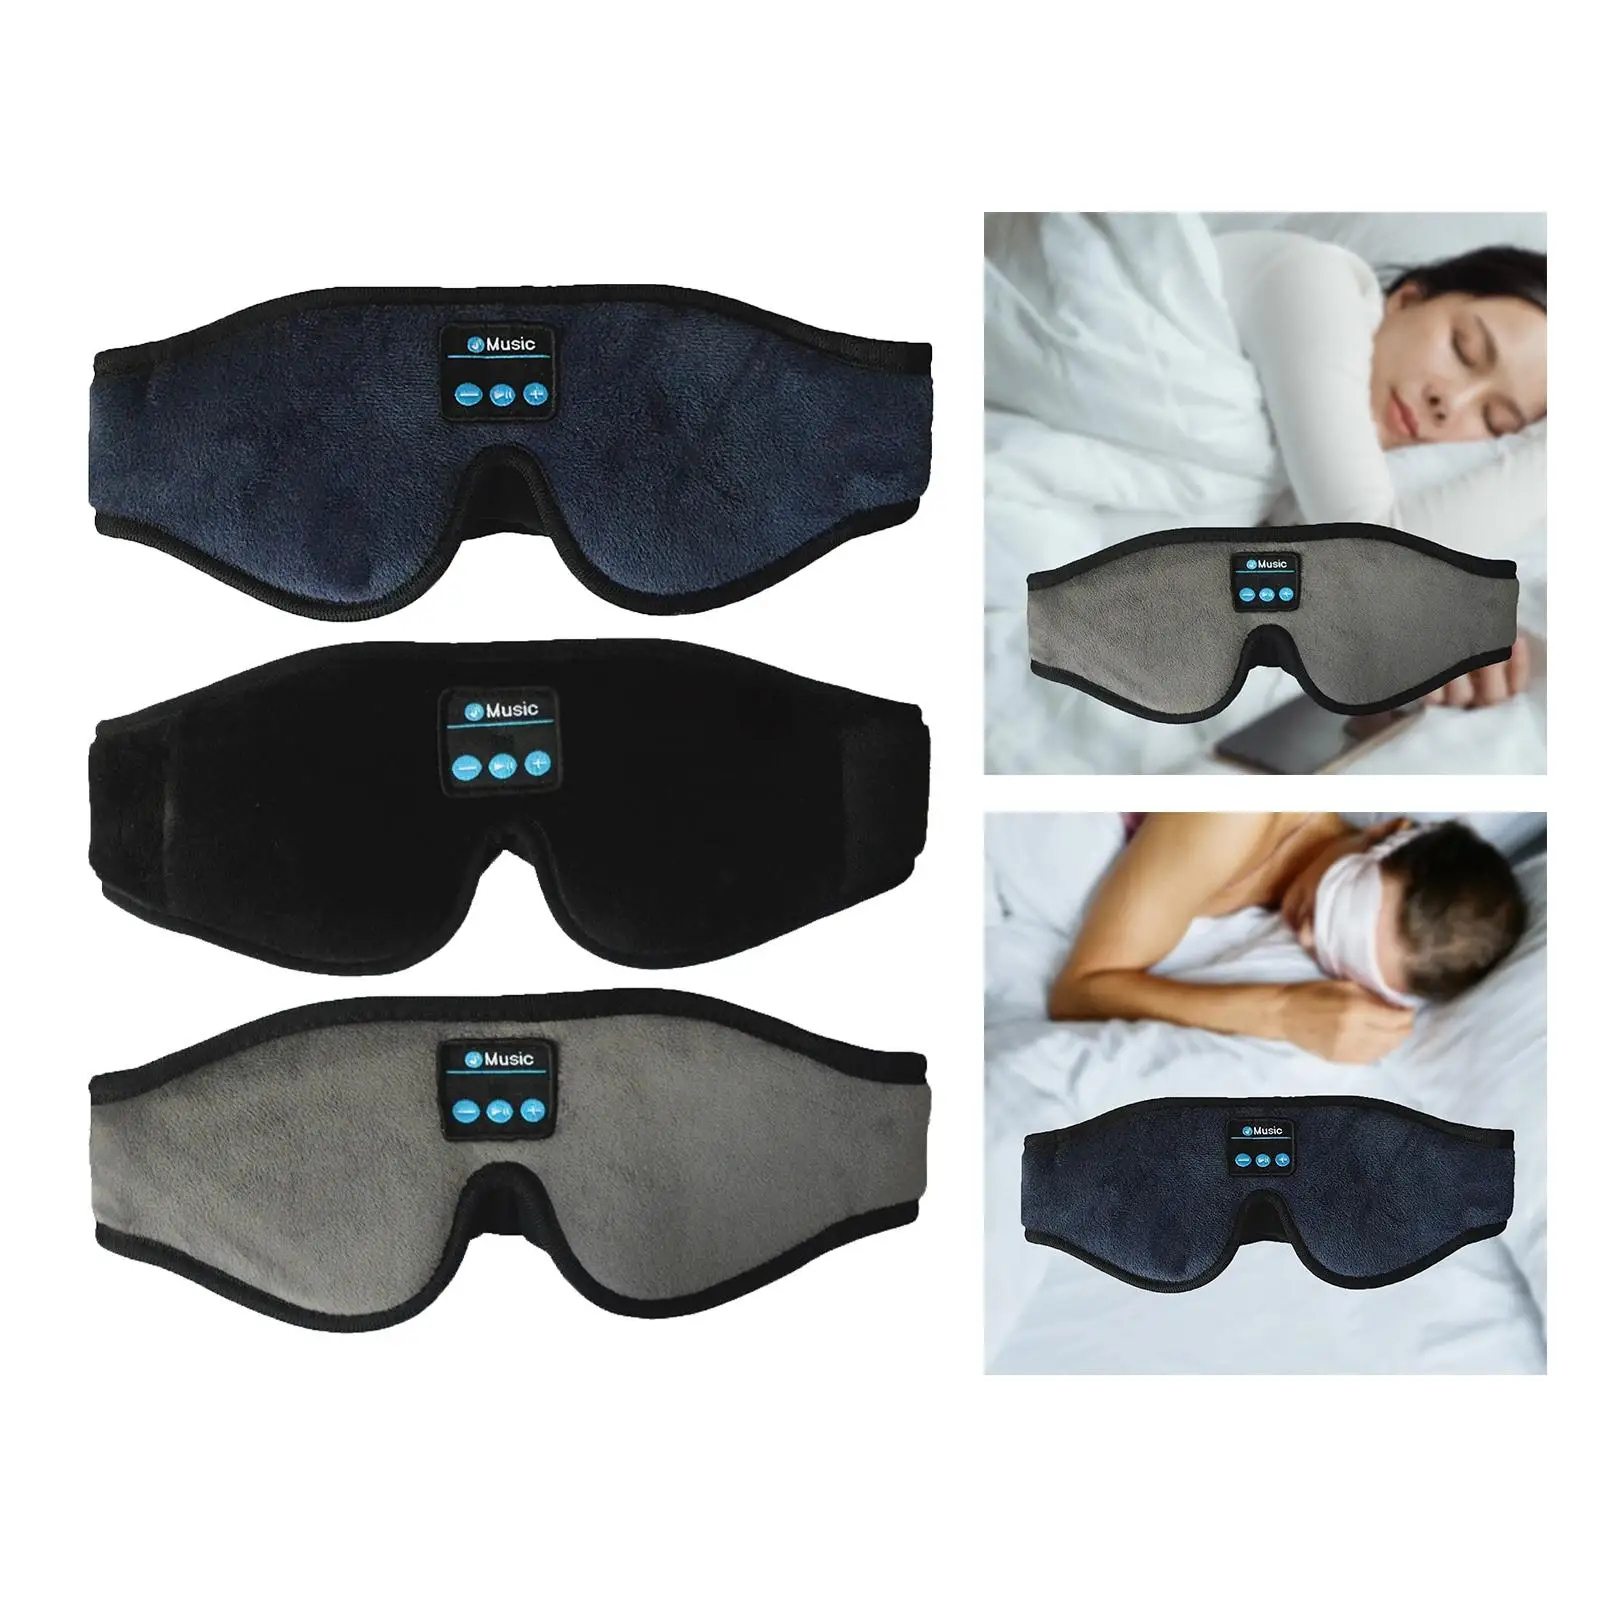  Bluetooth 5.0 Wireless Unique Gifts Sleep Artifact   for Car Breaks Home Relaxation Men Women